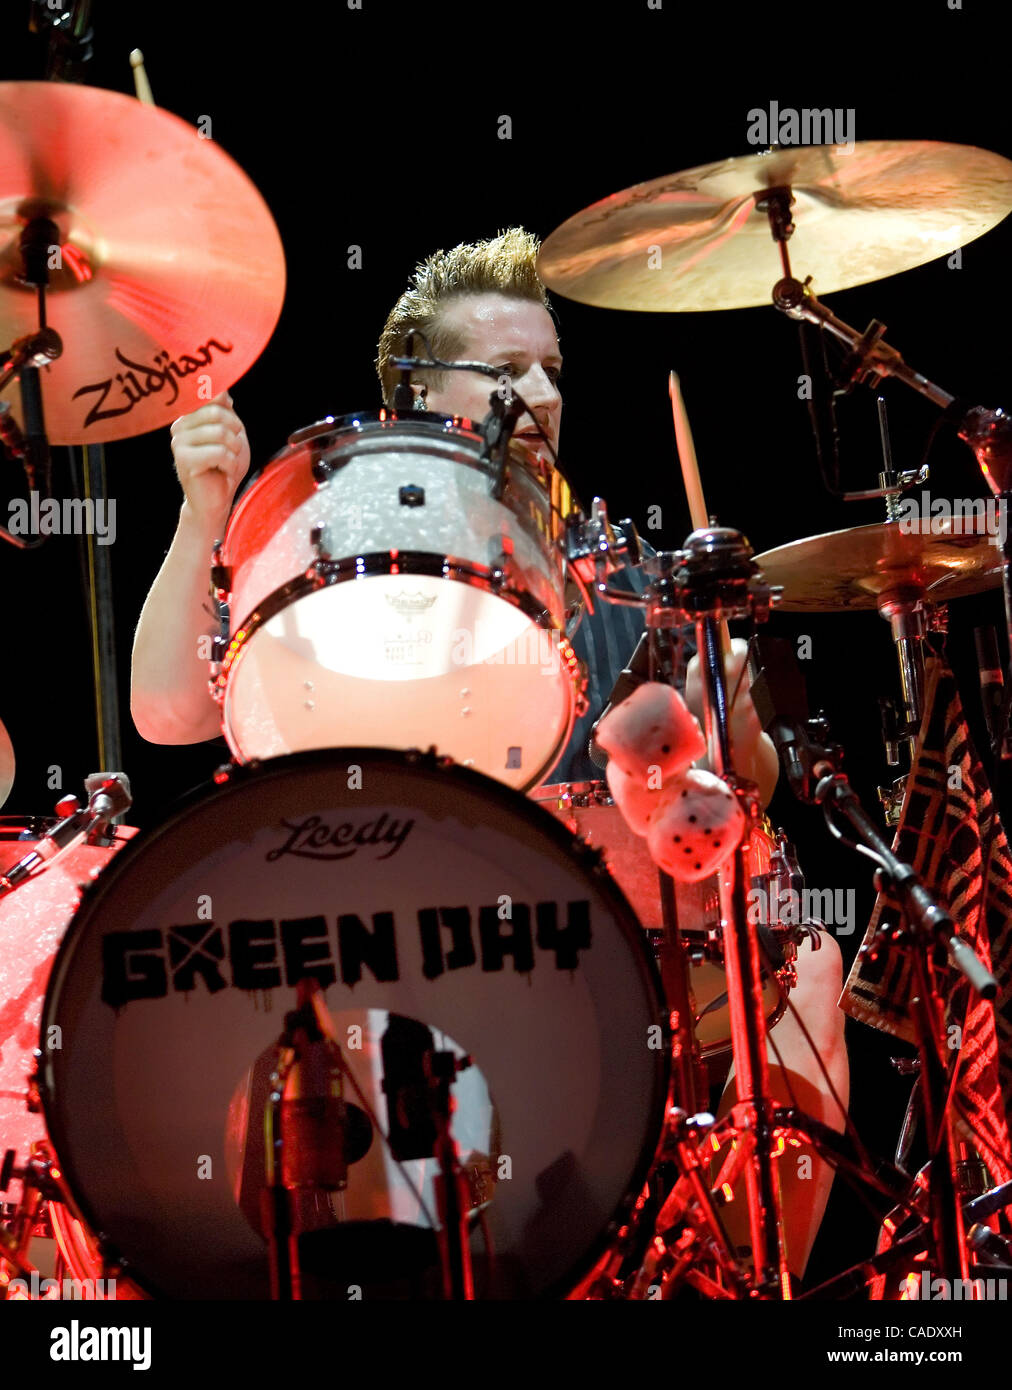 Aug 28, 2010 - Englewood, Colorado, USA - Drummer TRE COOL of GREEN DAY performs live at the Comfort Dental Amphitheatre (Credit Image: © Hector Acevedo/ZUMApress.com) Stock Photo